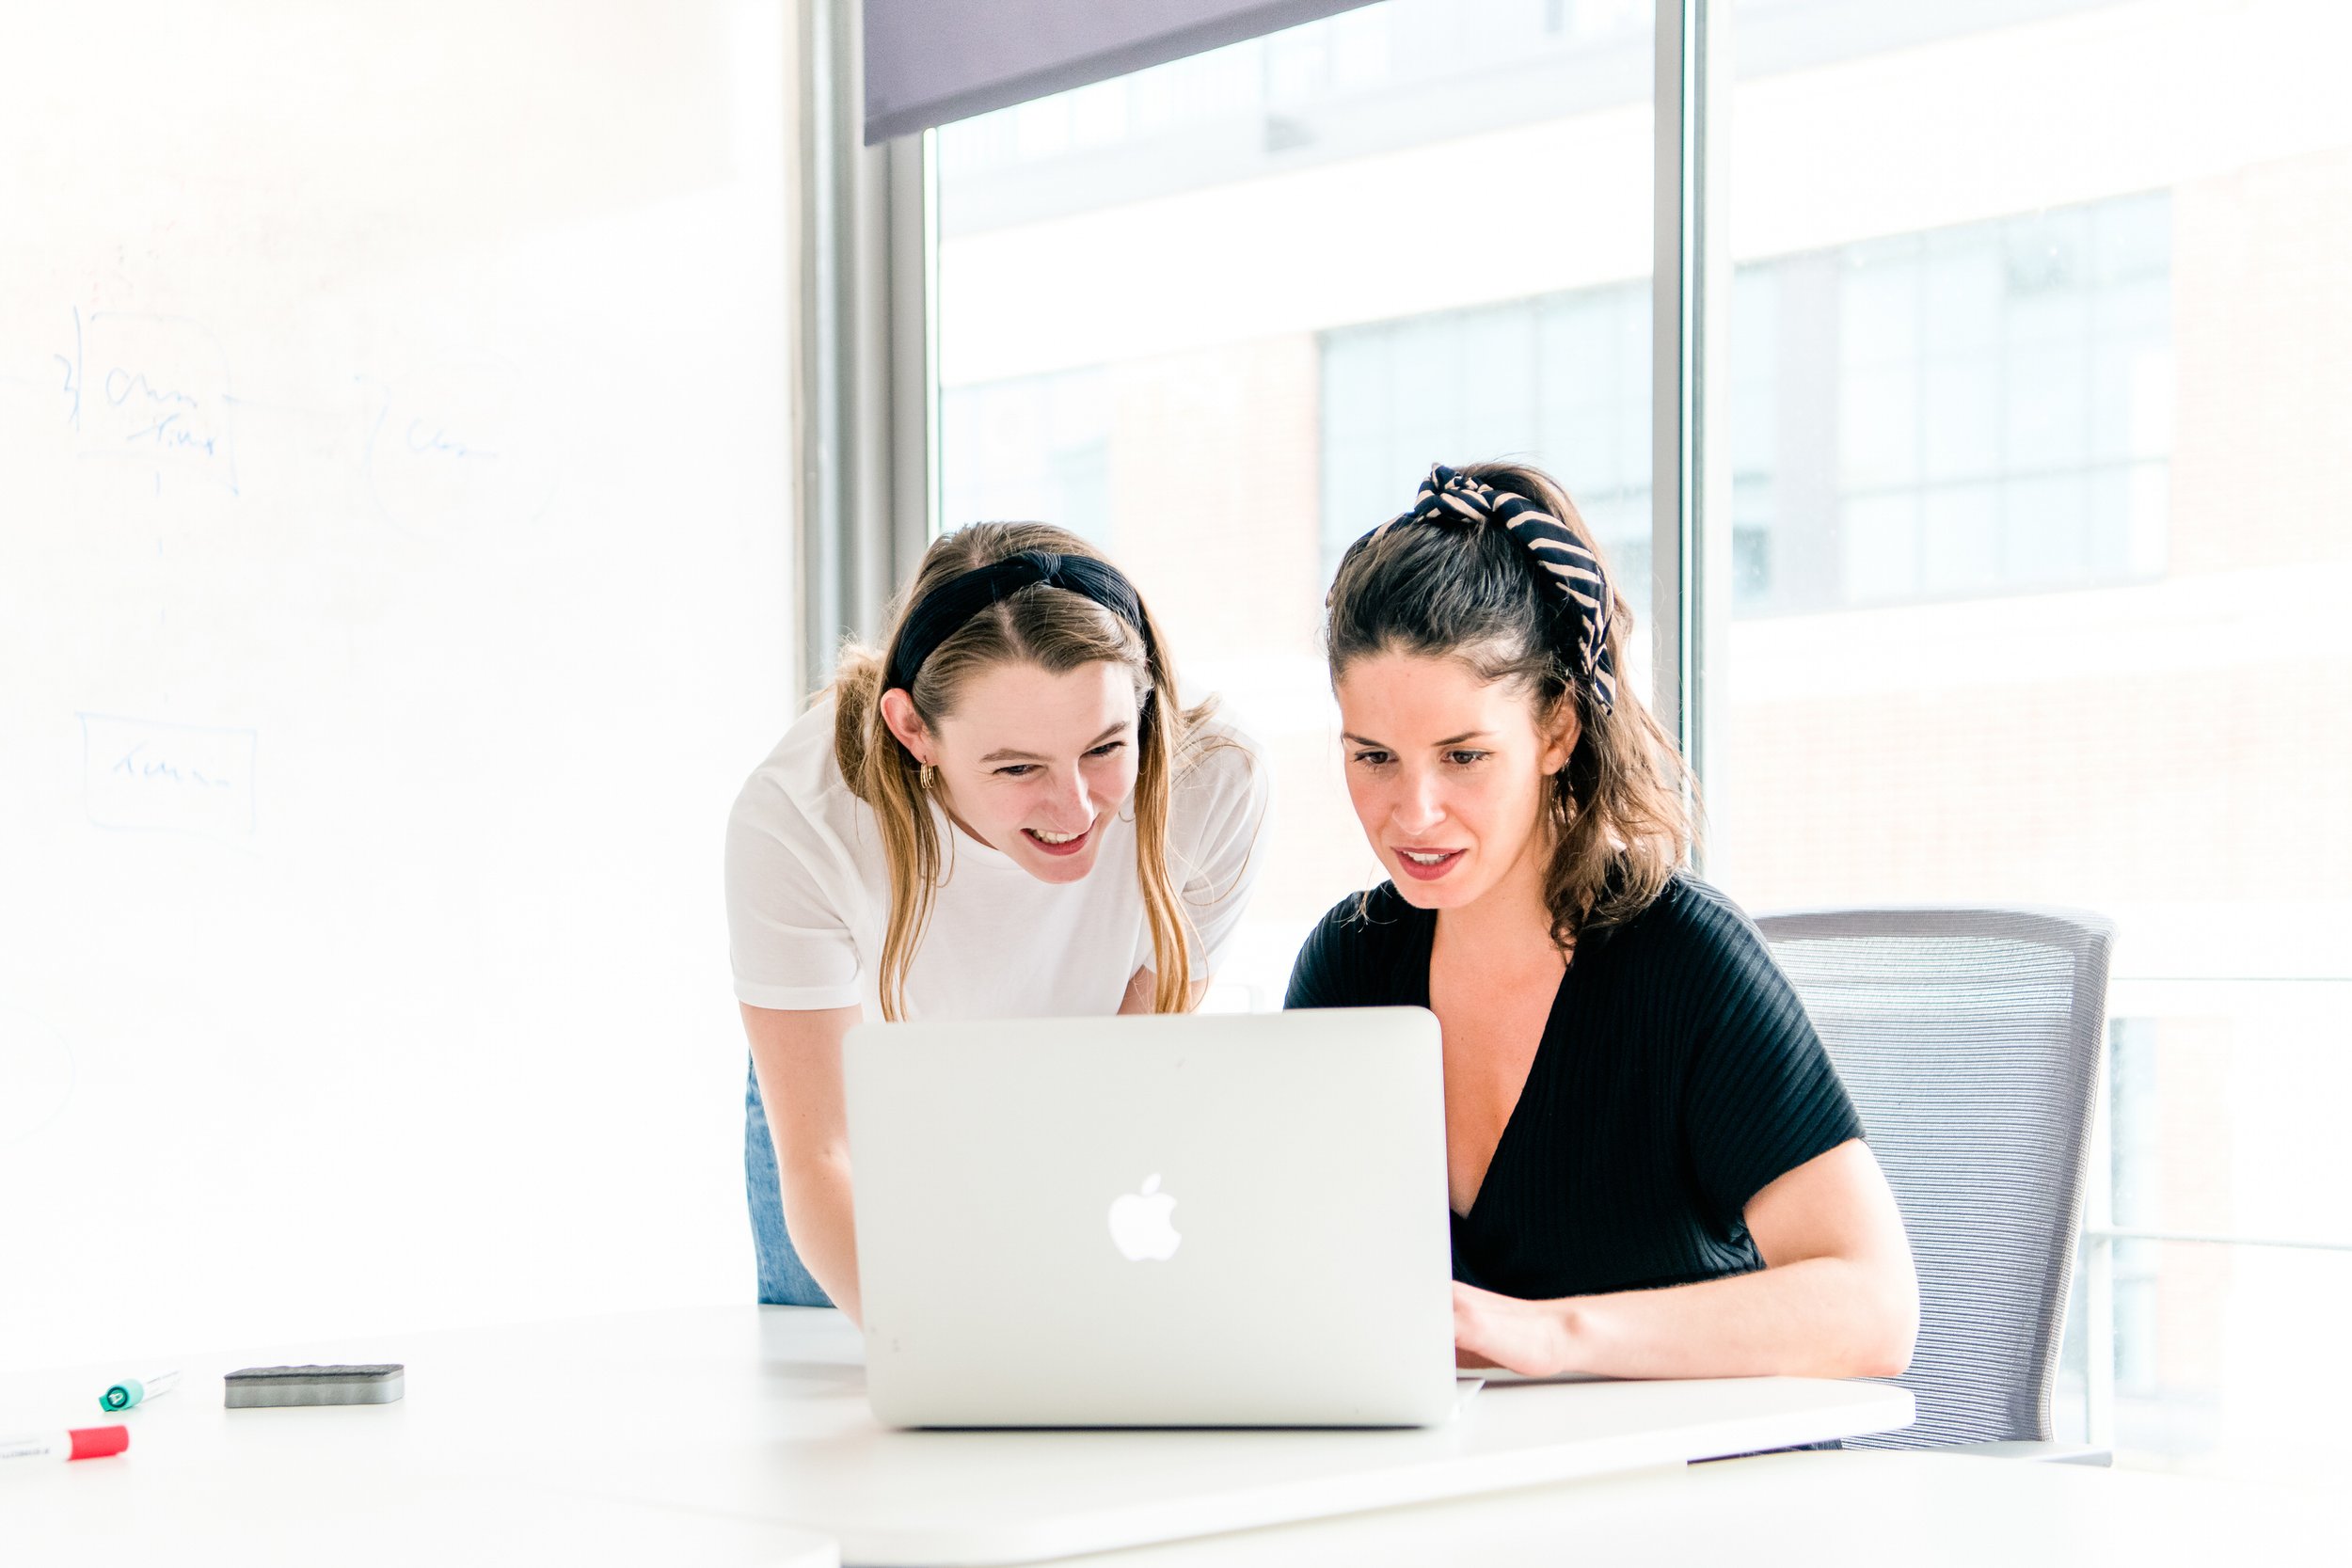  Well lit image of 2 business women looking at a laptop. 